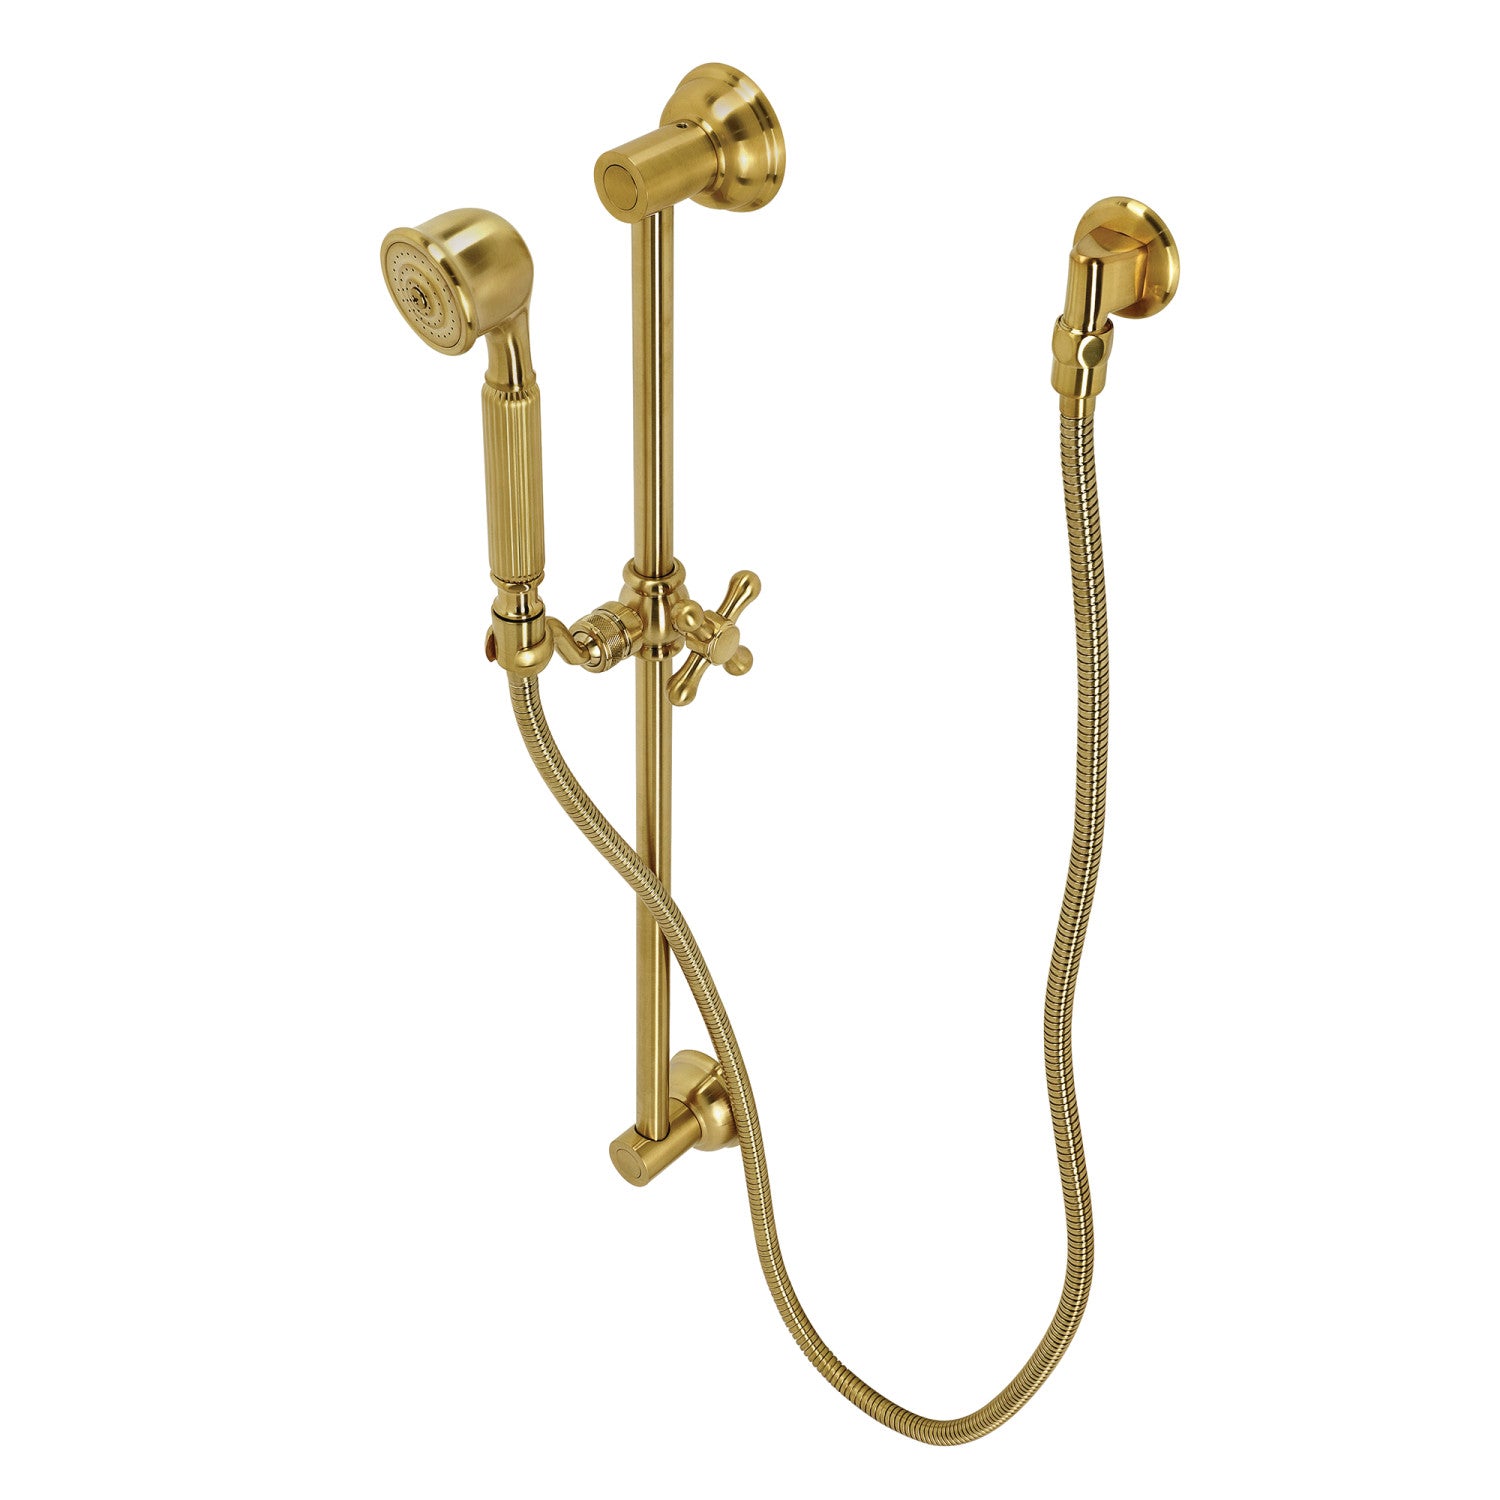 Kingston Brass Made To Match KAK3327W7 Hand Shower Combo with Slide Bar,  Brushed Bras